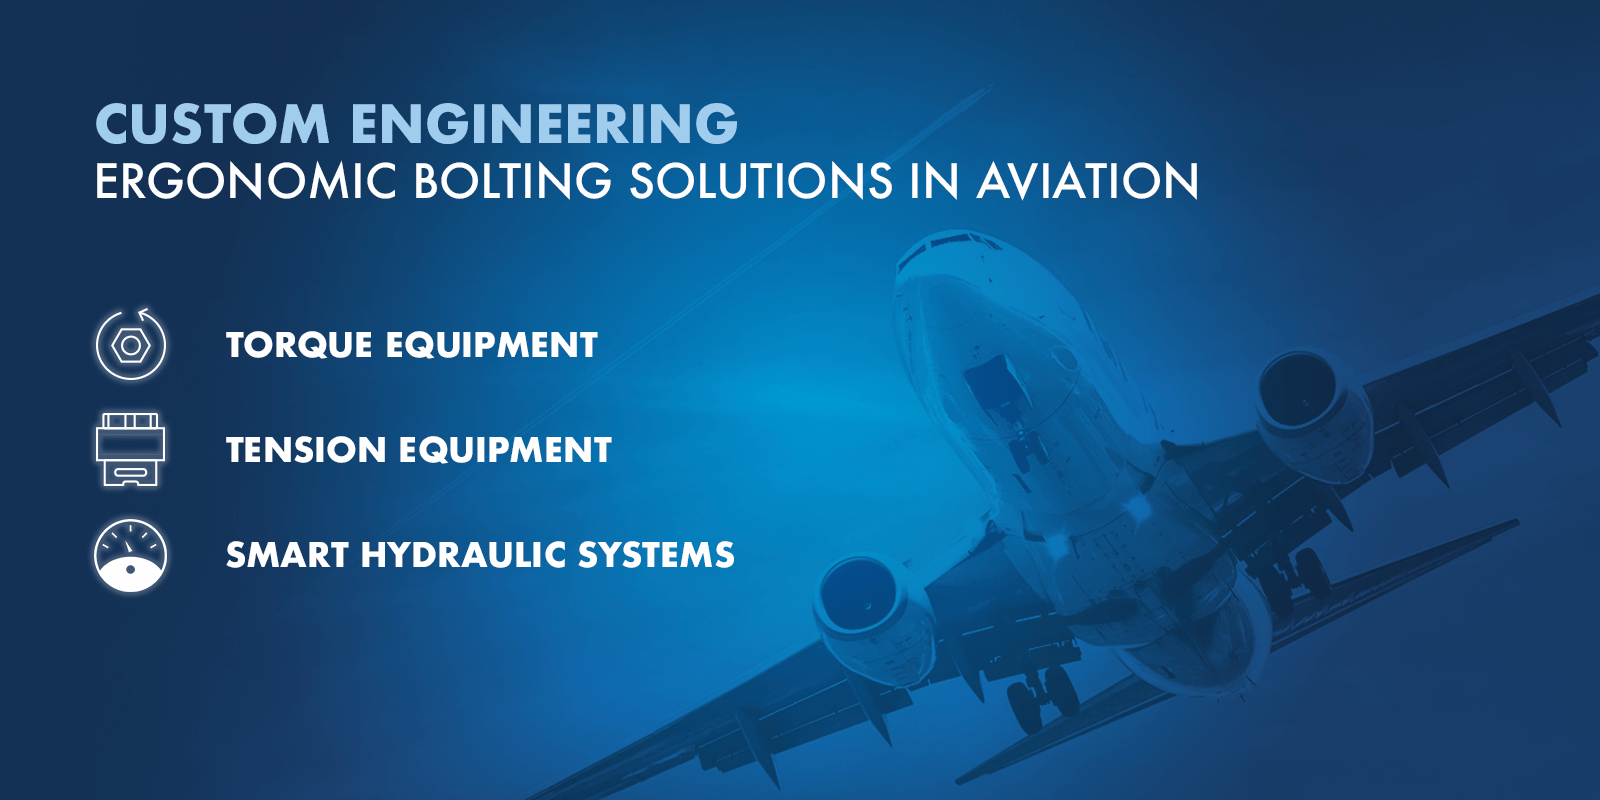 Bolting Solutions in Aviation